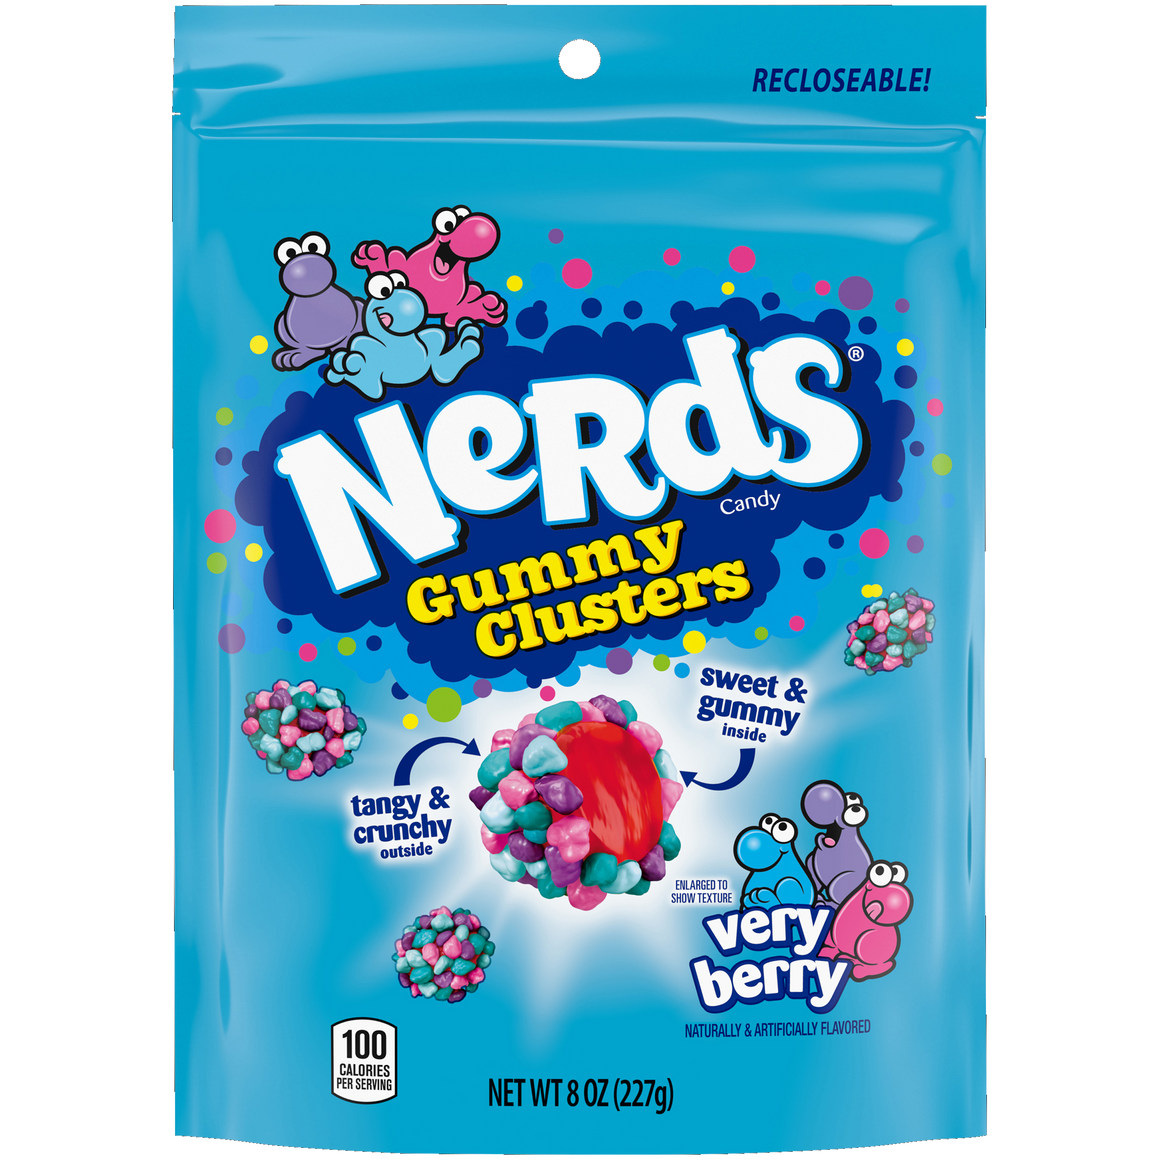 All City Candy Nerds Gummy Clusters Very Berry 8 oz. Bag Chewy Ferrara Candy Company For fresh candy and great service, visit www.allcitycandy.com